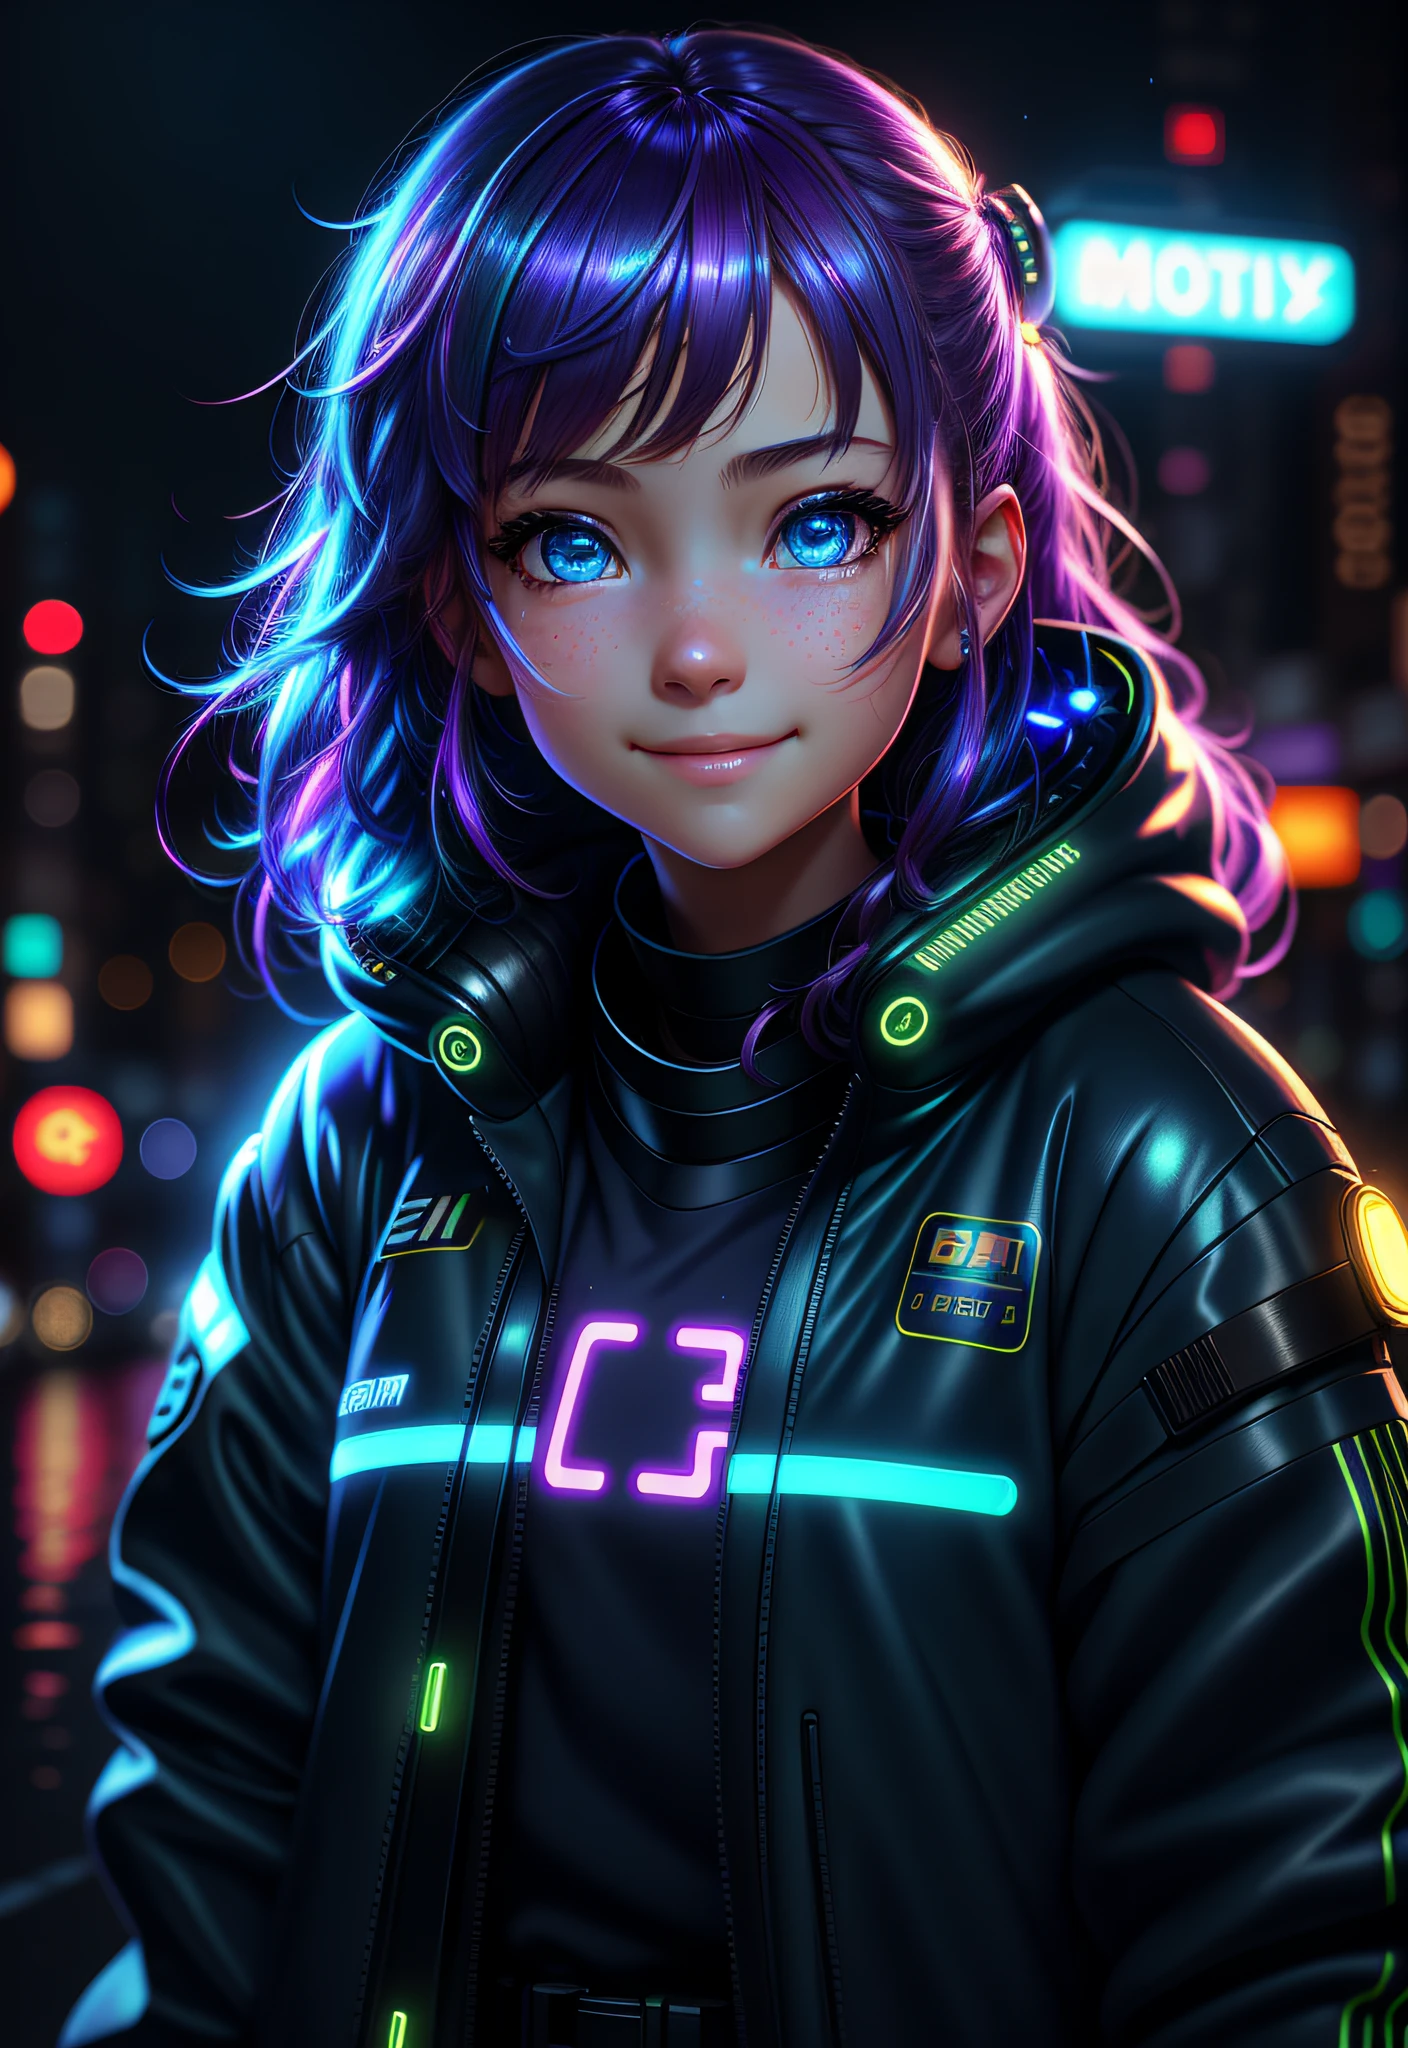 masterpiece, best quality, half body, portrait, night city, 1girl, anime, 3D, Japan, pixar, realistic, teen girl, smiling, cute face, harajuku fashion style, rain coat, beautiful, colourful, neon lights, cyberpunk, smooth skin, illustration, artstation, painting by stanley artgerm lau, sideways glance, foreshortening, extremely detailed 8K, smooth, high resolution, ultra quality, highly detail eyes, highly detail mouth, highly detailed face, perfect eyes, both eyes are the same, true light, glare, Iridescent, Global illumination, real hair movement, real light, real shadow, real face, hd, 2k, 4k, 8k, 16k, realistic light, realistic shadow, bright Eyes, fluorescent eyes, soft light, dream light